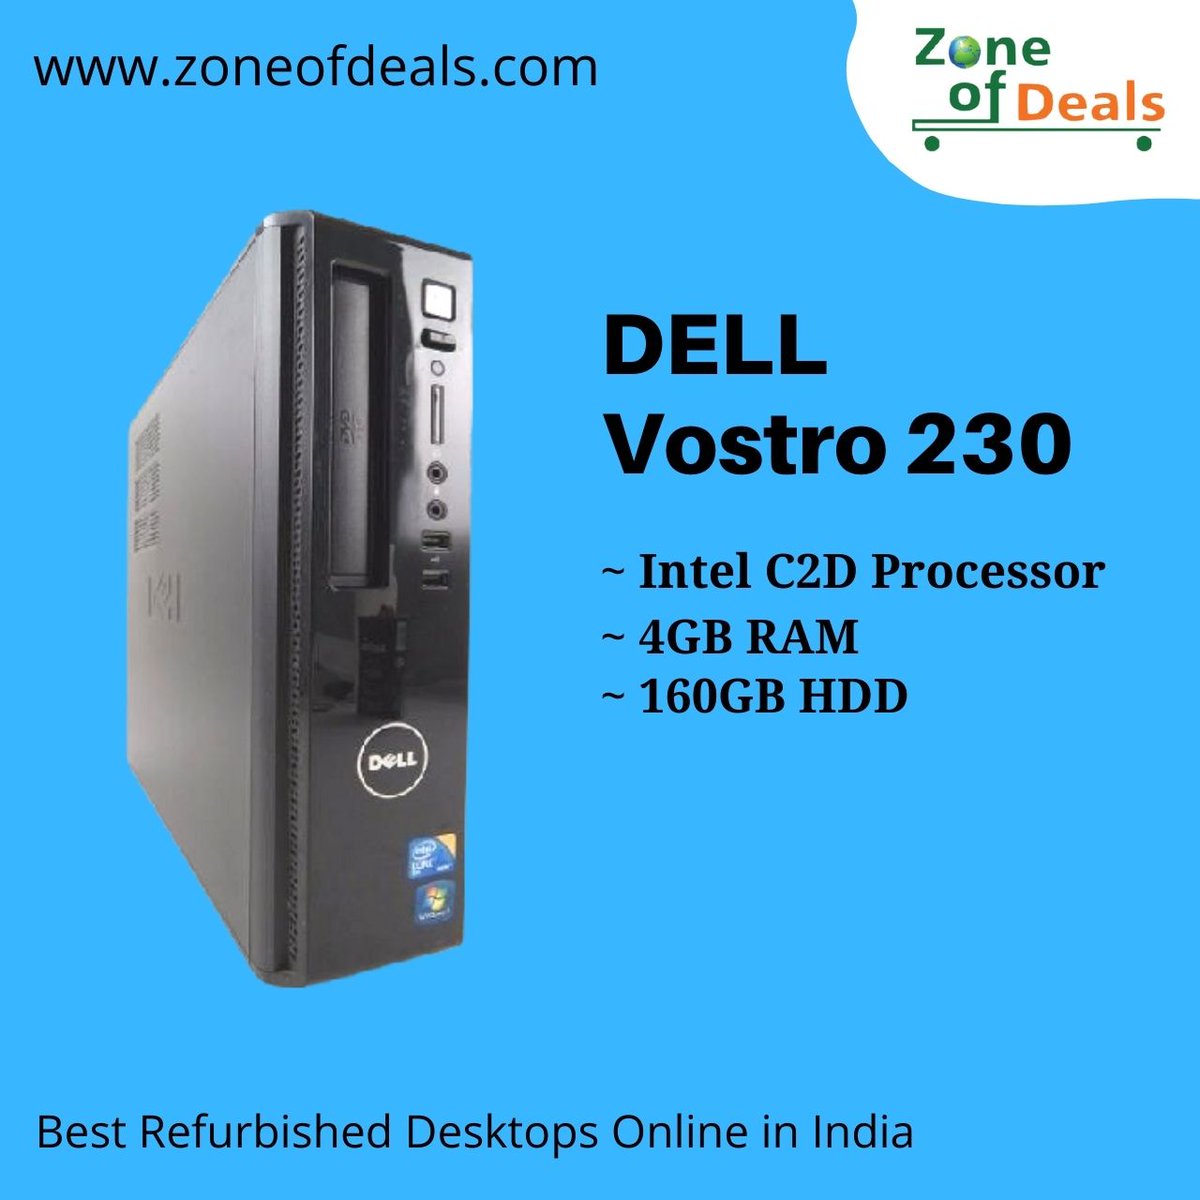 Dell Vostro 230 | Core 2 Duo | 4GB+160GB | Refurbished Desktop - Refurbished MINI PC 
Cash On Delivery Also Available.
Safe Shipping Through Reputed Courier Services.
 #Dell #Dellvostro #dellpc #pc #mini #MiniPC #dellvostro
#dellpc 
#refurbishedpc
#corei5 
#minipc 
#tinypc